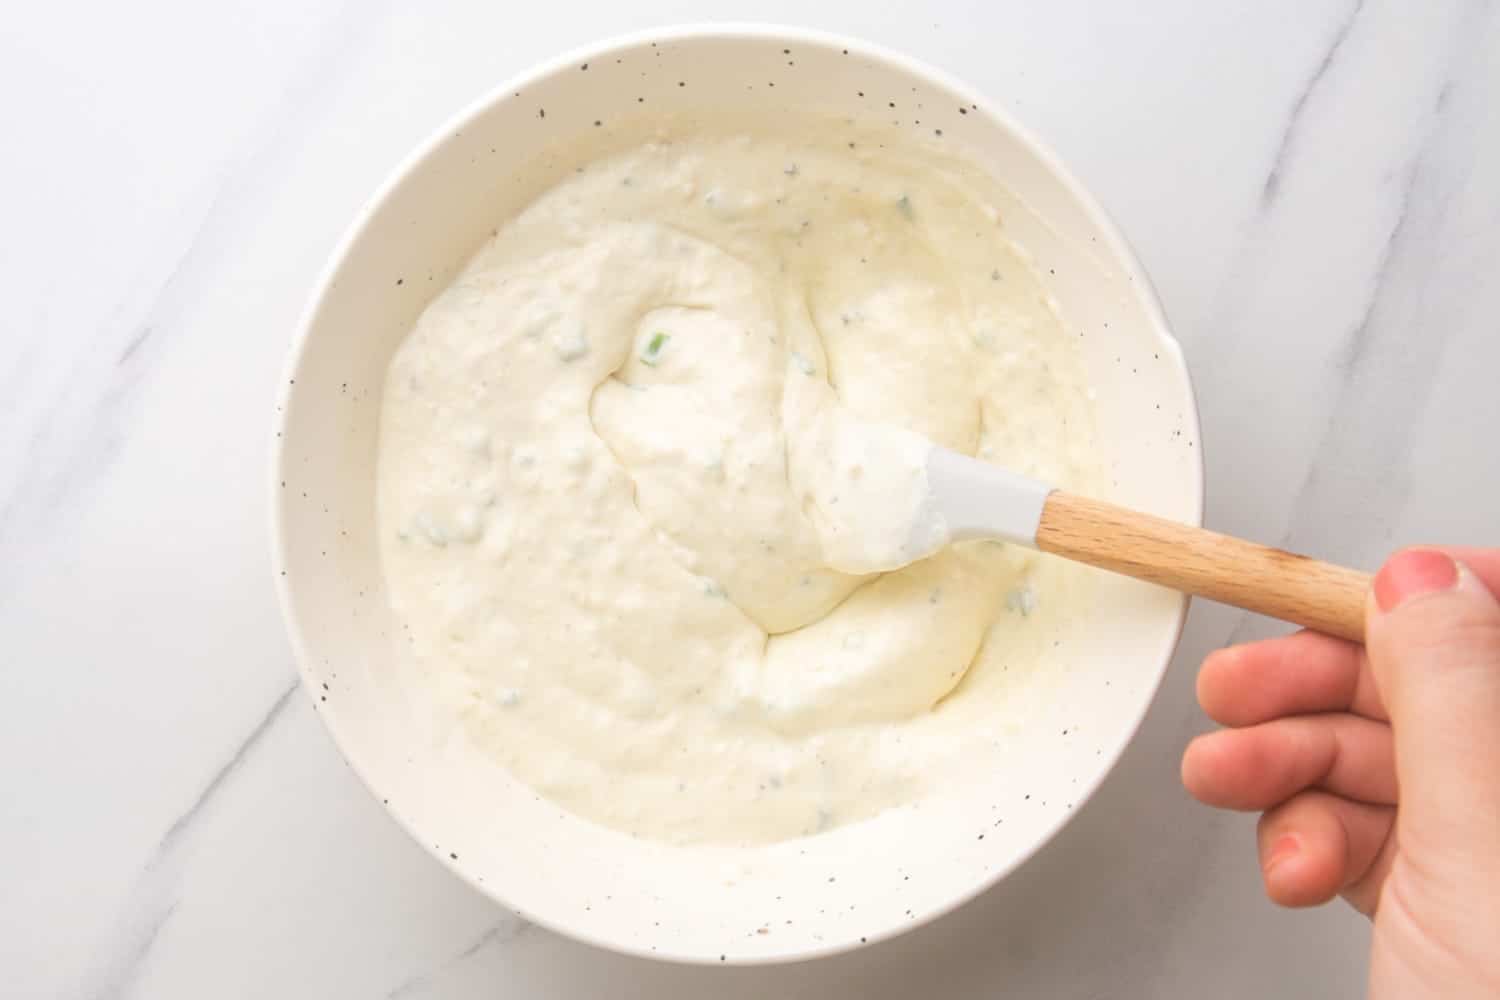 Mixing up the horseradish cream sauce ingredients in a white bowl